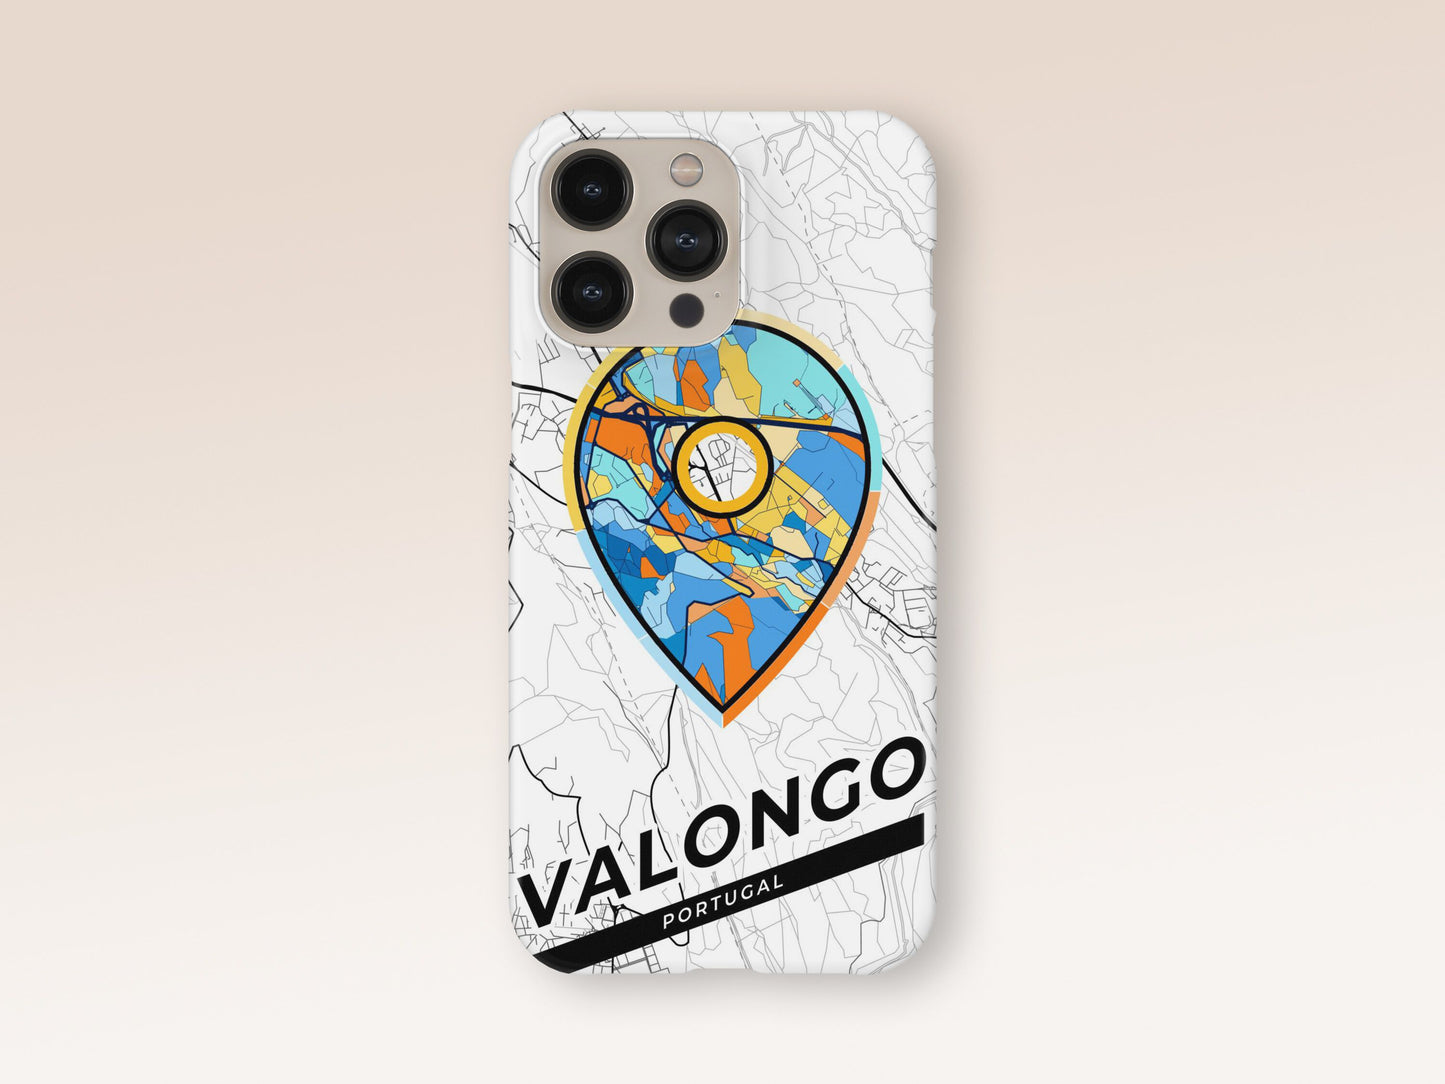 Valongo Portugal slim phone case with colorful icon 1